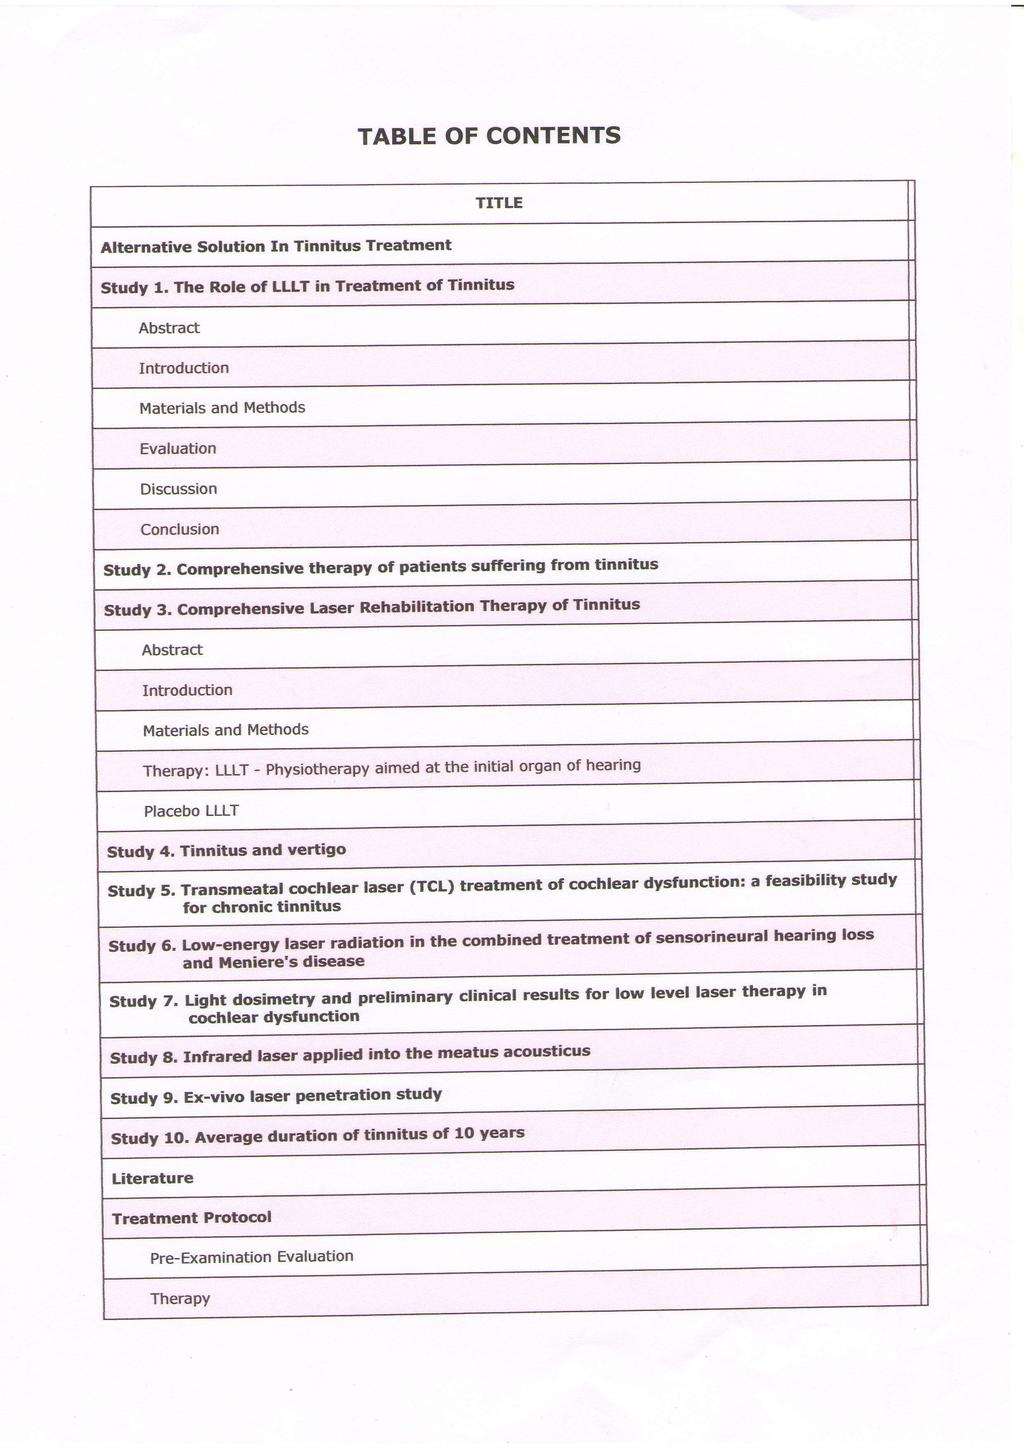 TABLE OF CONTENTS Alternative Solution In Tinnitus Treatment Study 1. The Role of LLLT in Treatment of Tinnitus study 2. comprehensive therapy of patients suffering from tinnitus study 3.